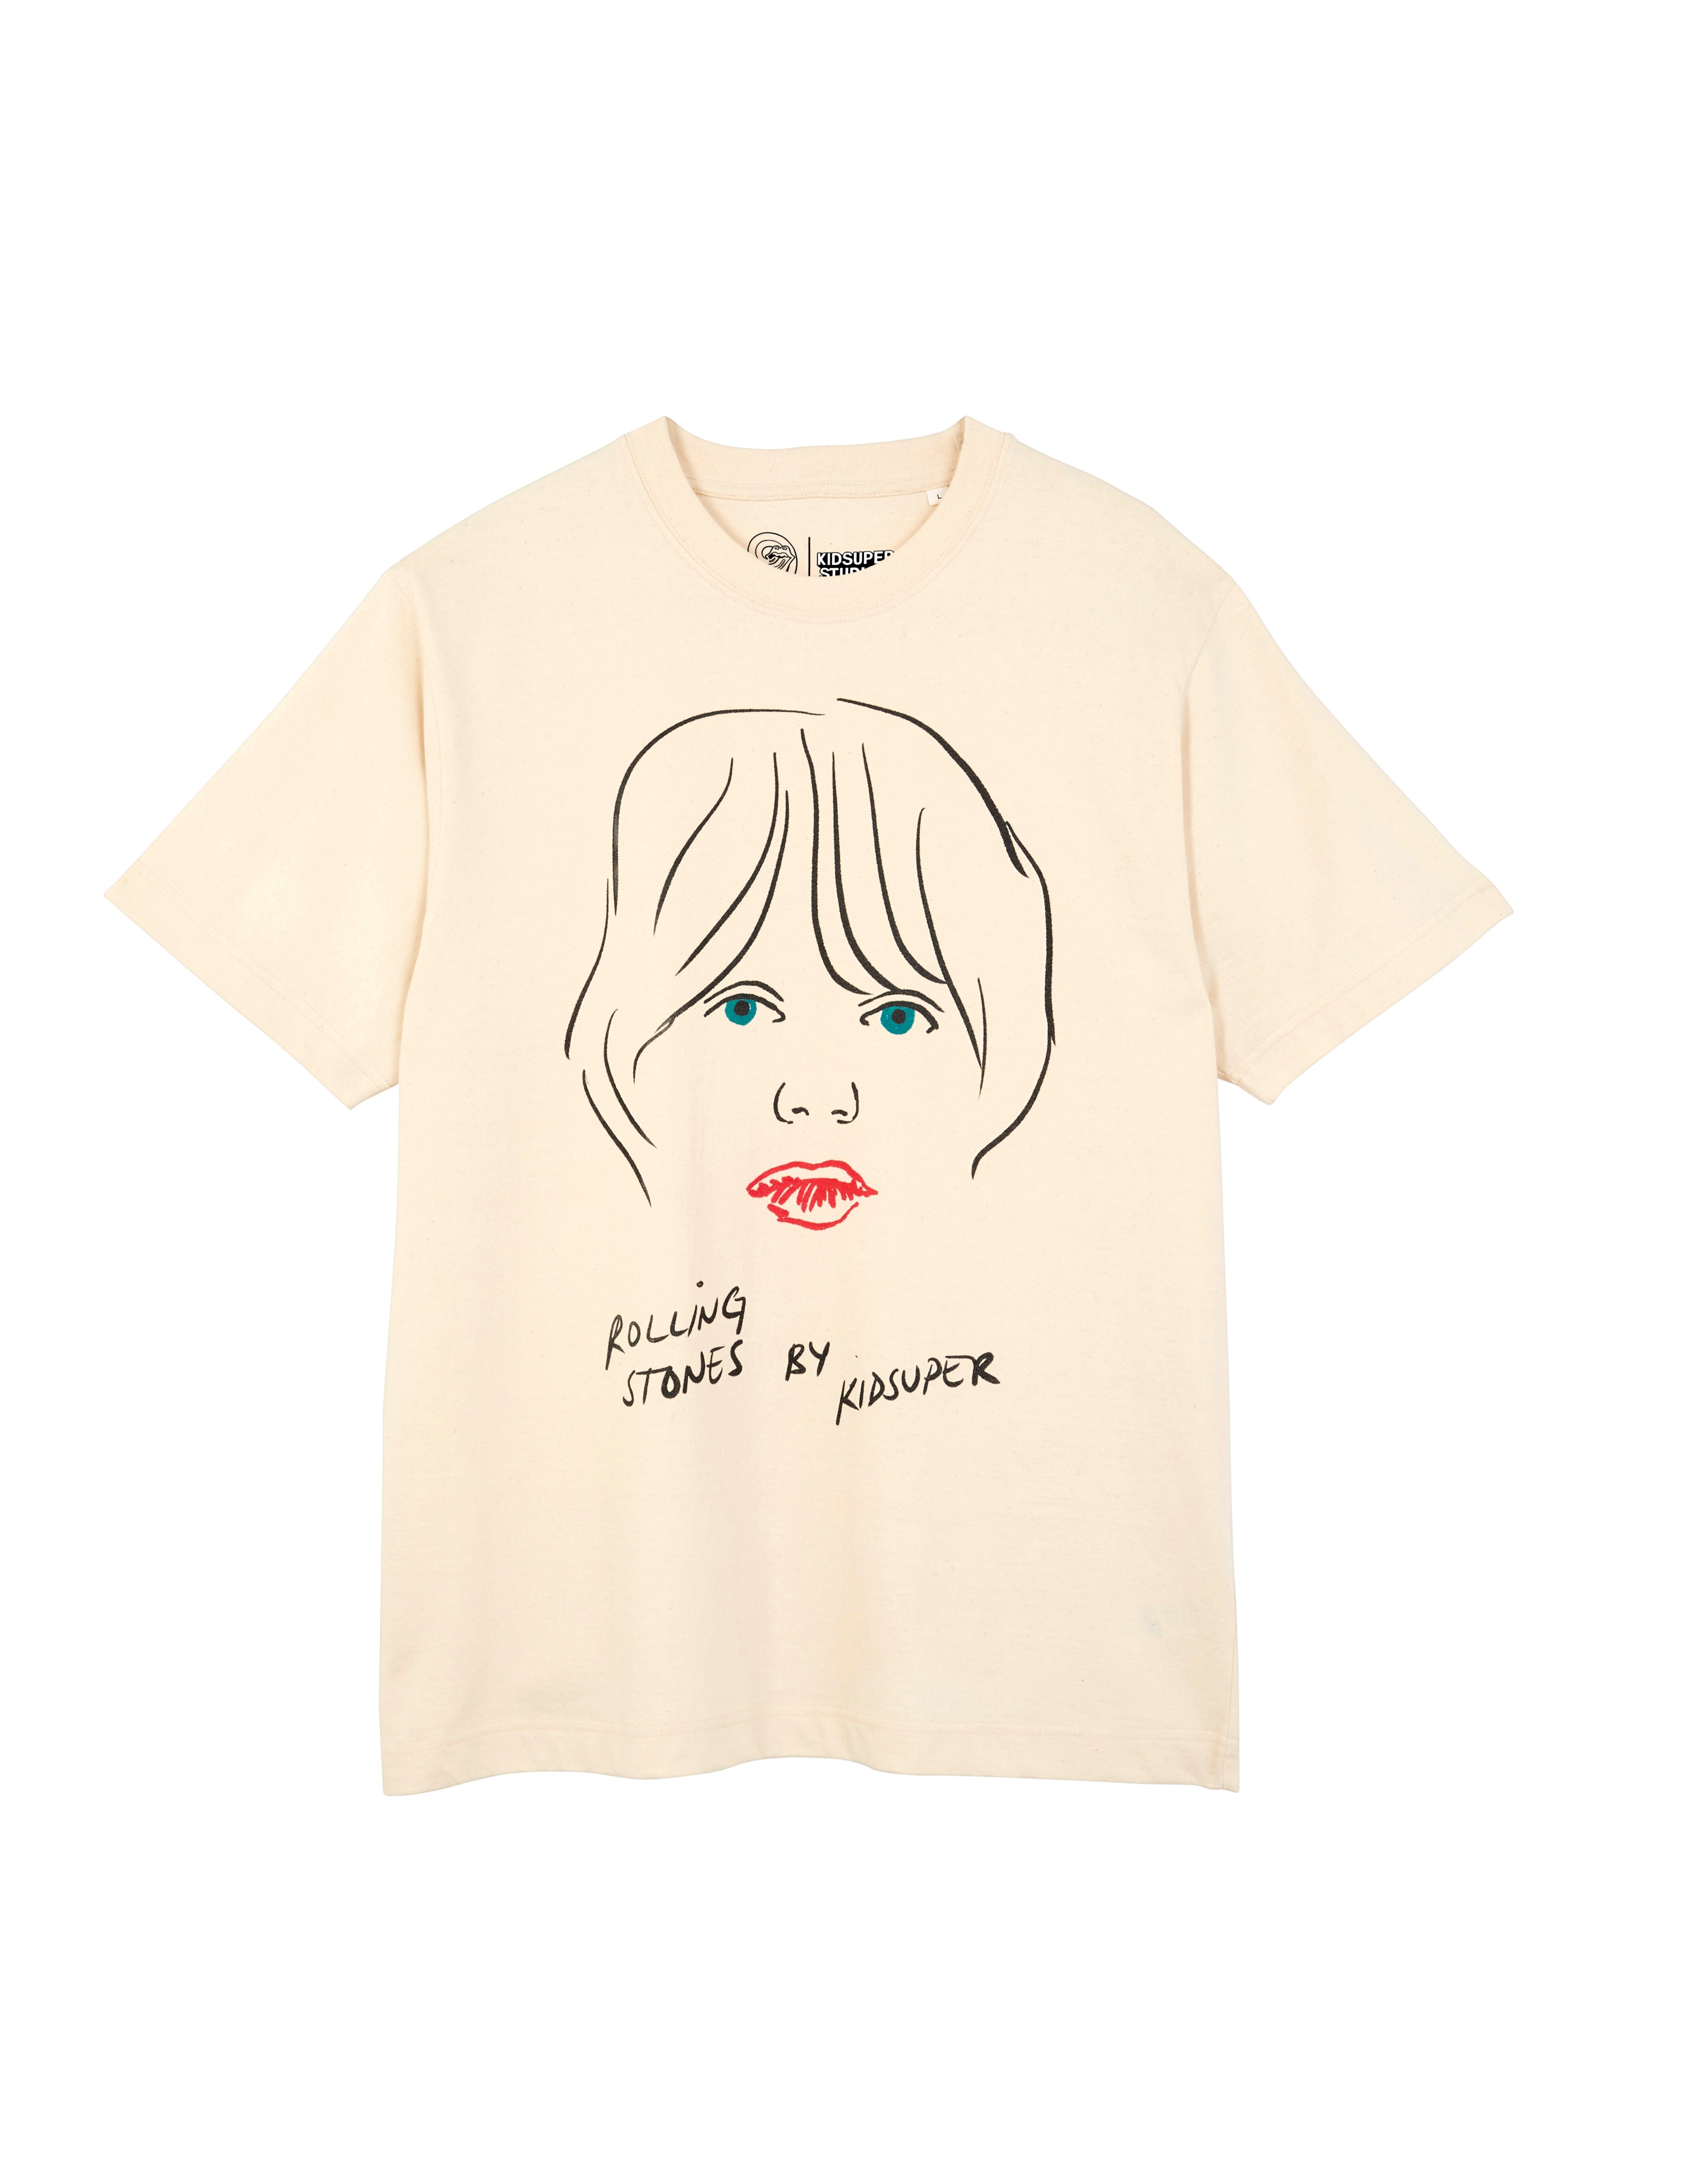 RS No. 9 Carnaby - RS No. 9 x KidSuper Mick Sketch Natural T-Shirt (eCommerce Exclusive)